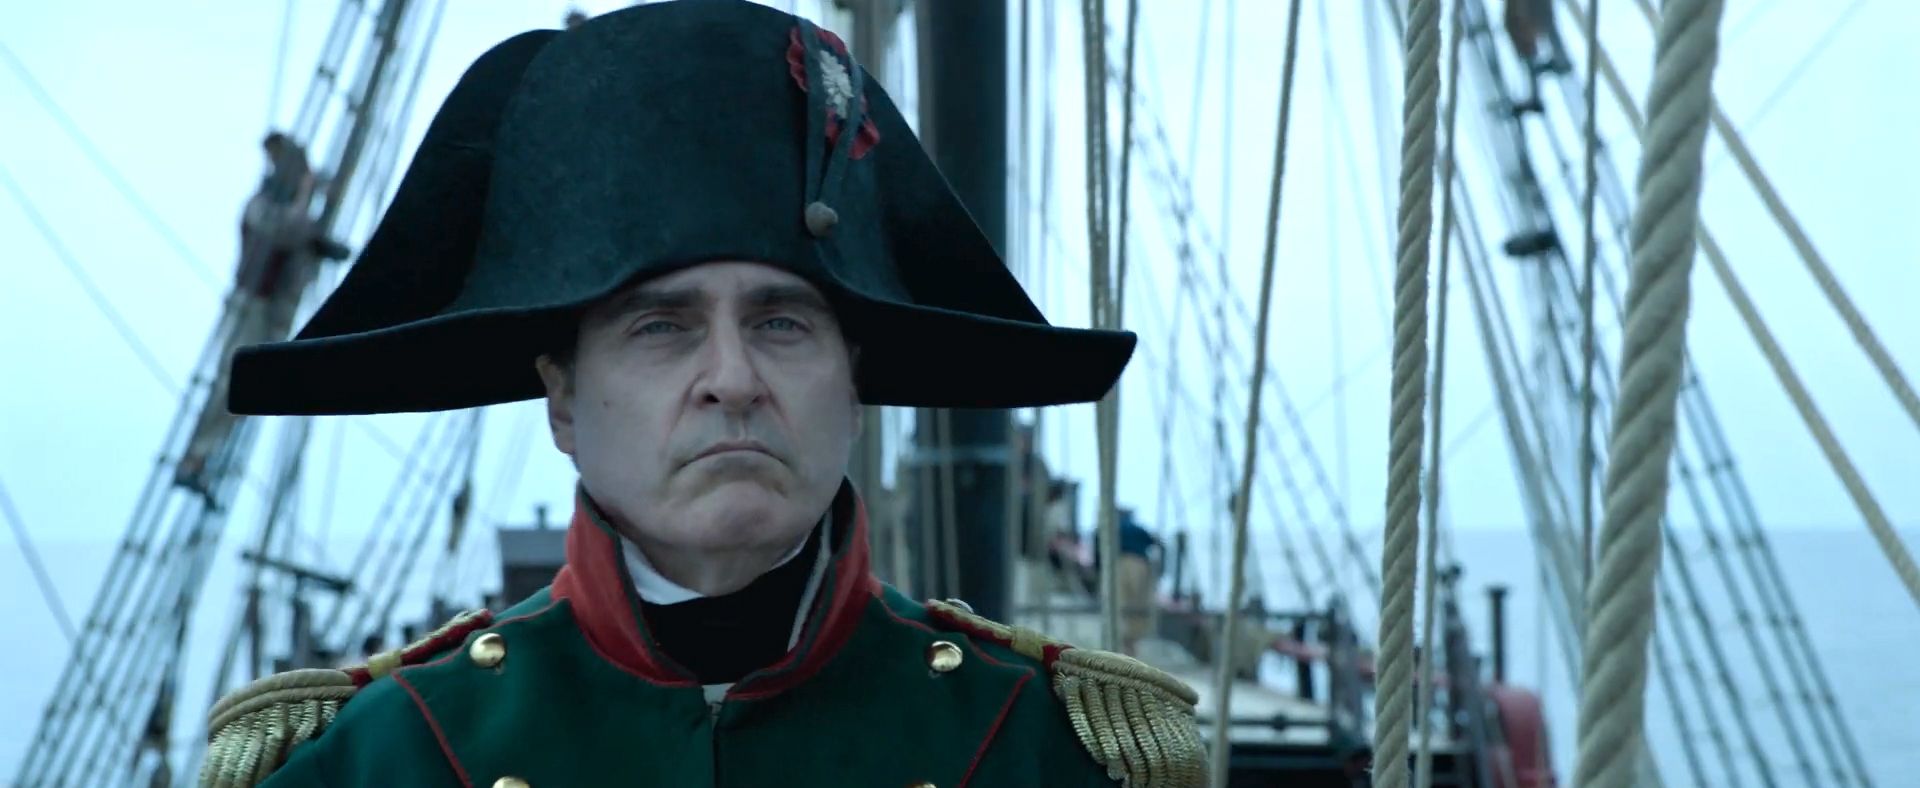 First reviews are in for #Napoleon, currently it's Fresh at 82% on the  Tomatometer, with 22 reviews., By Rotten Tomatoes